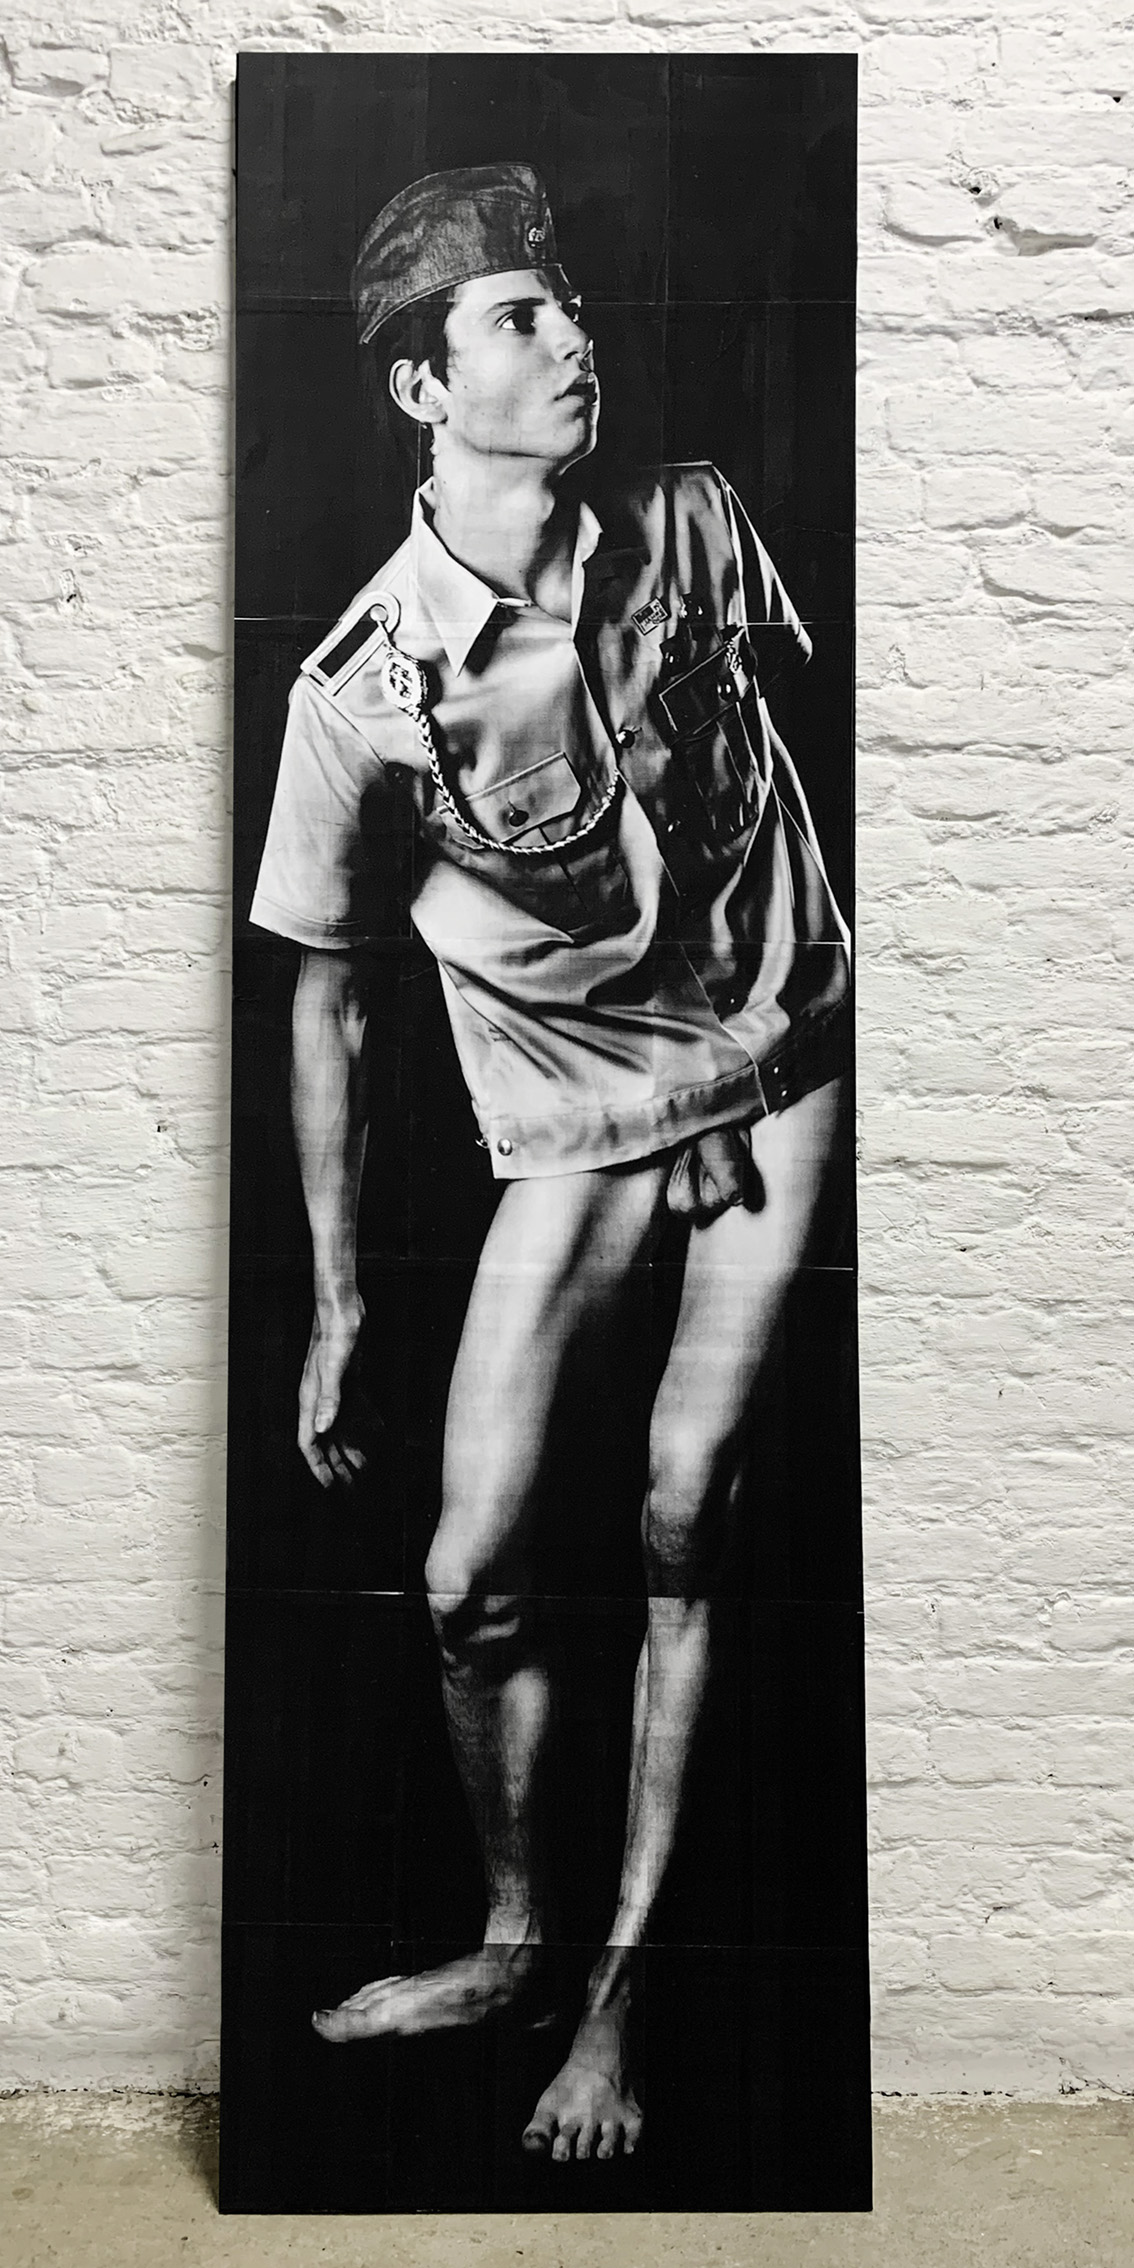 DDR GRENZTRUPPEN, laserprint, charcoal and varnish on plywood 175 x 50 cm